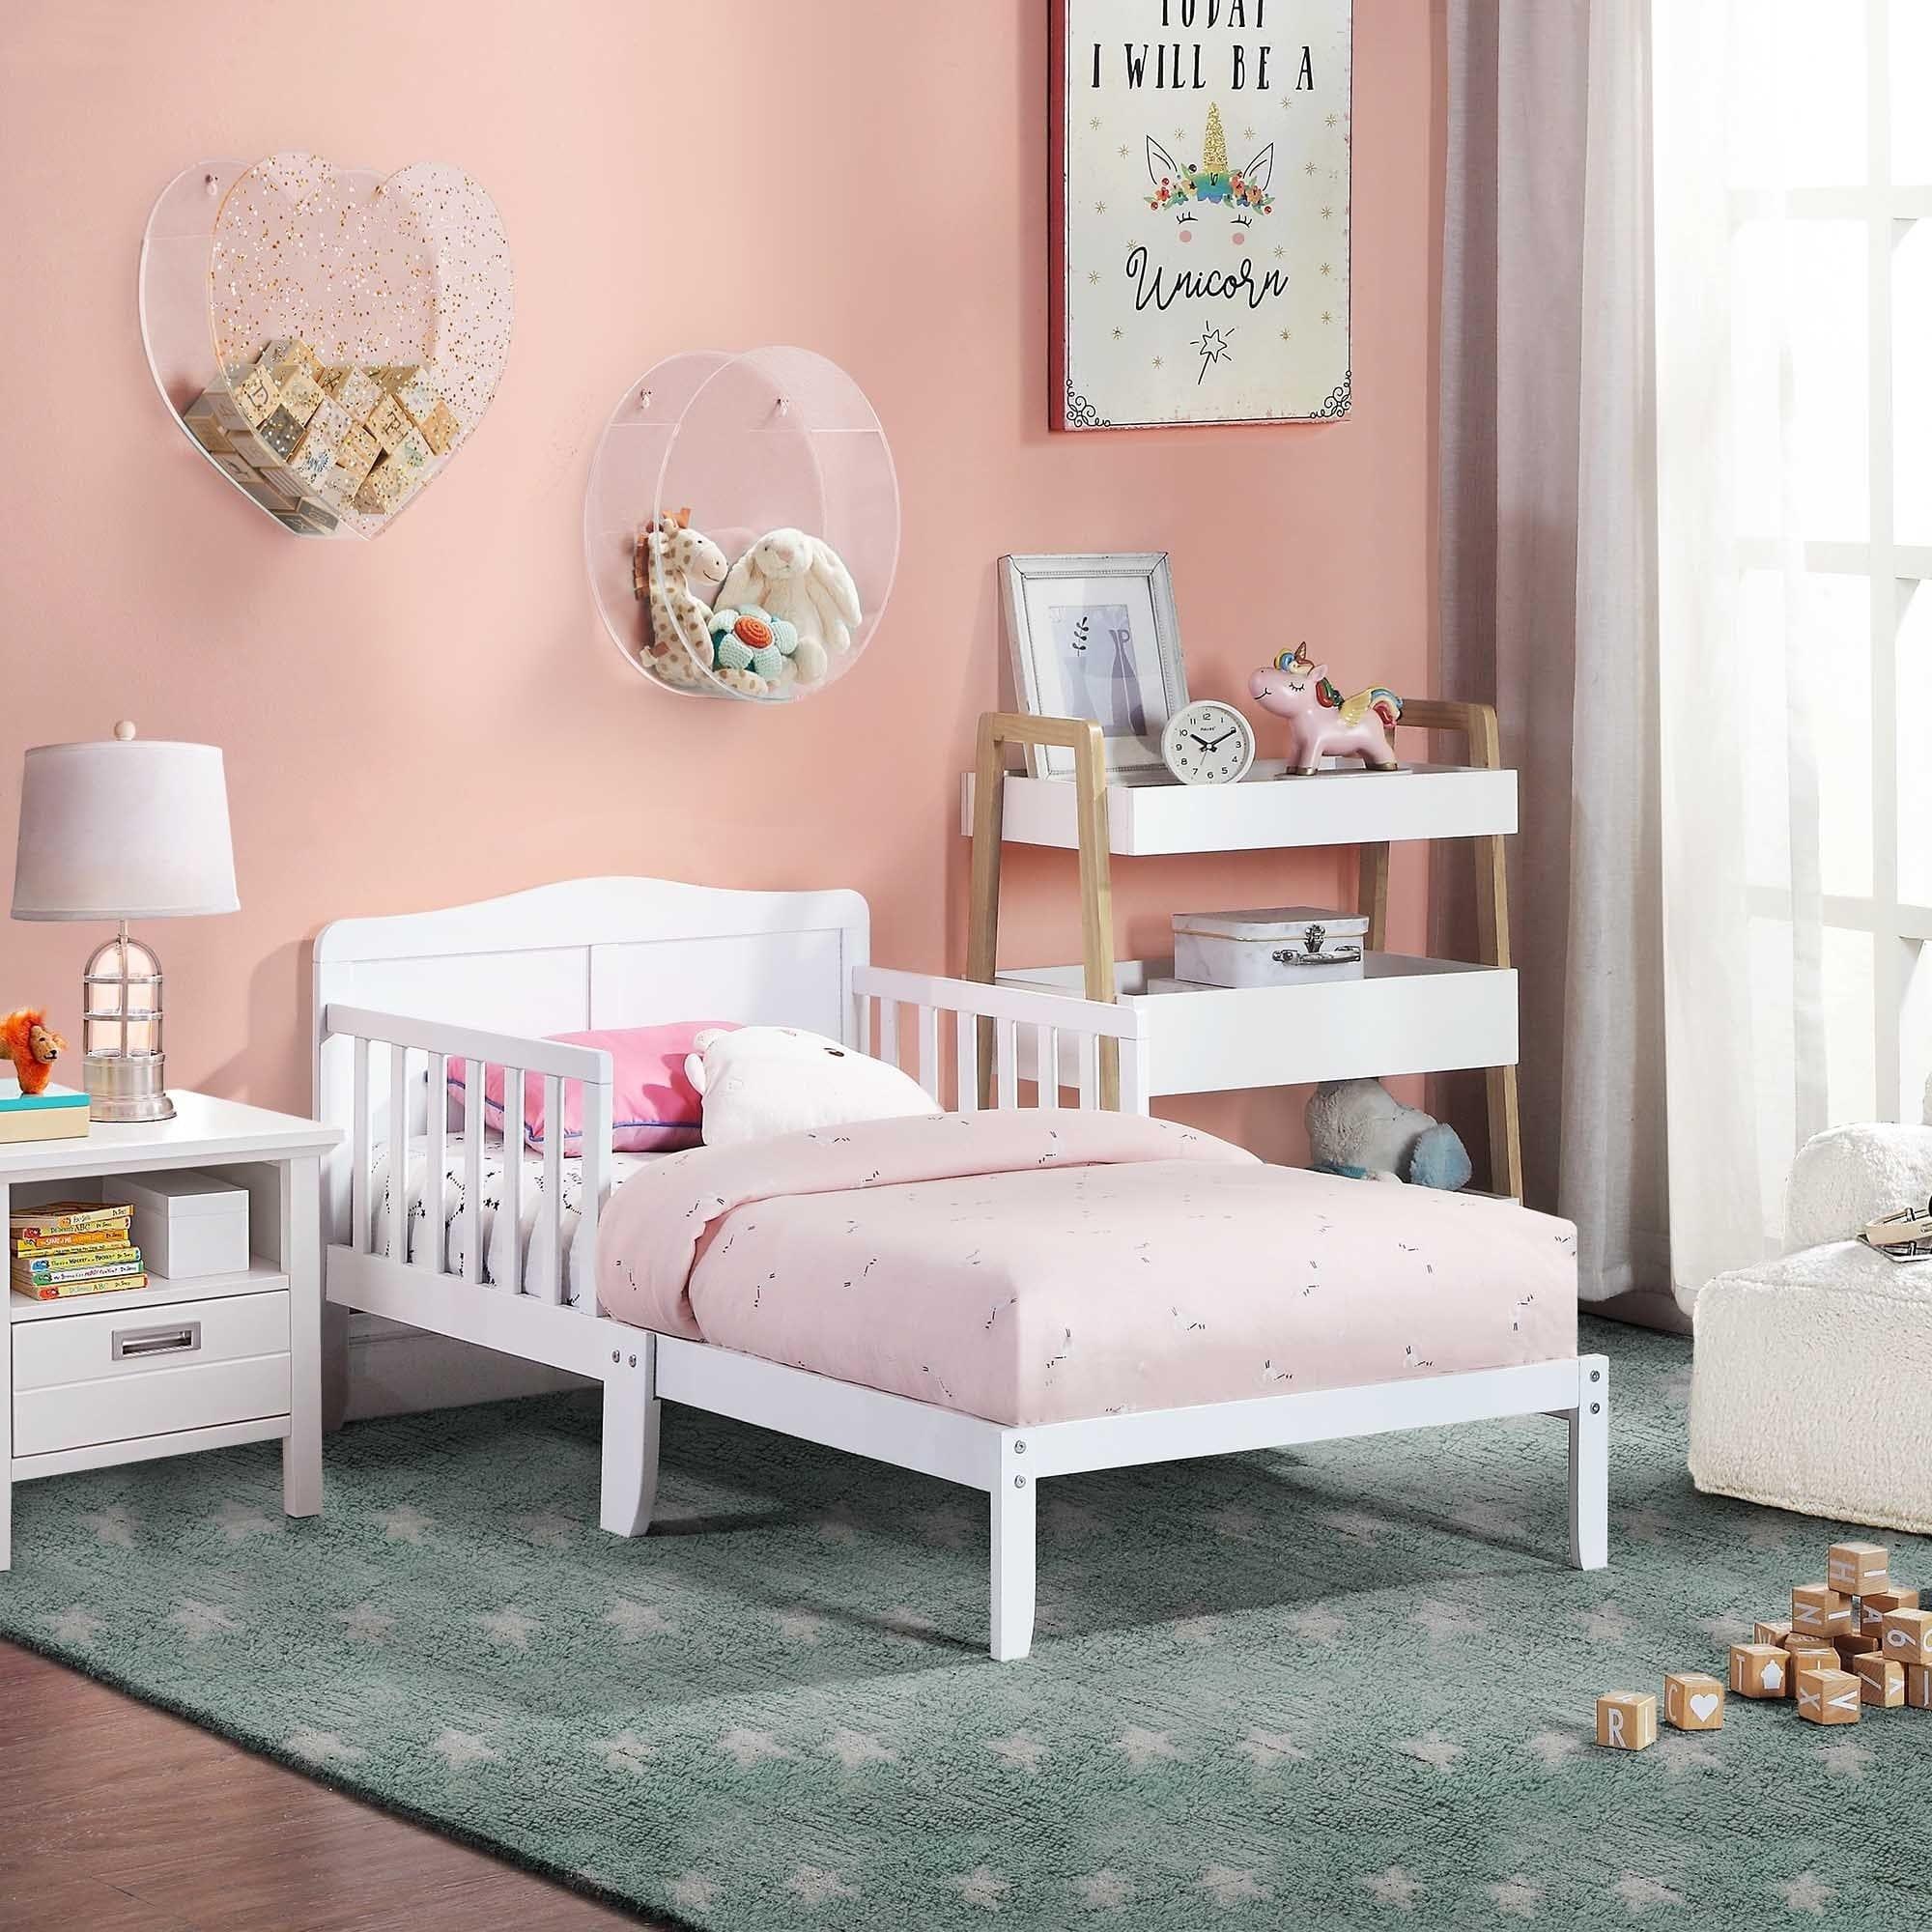 Shop Aria Bed Mademoiselle Home Decor